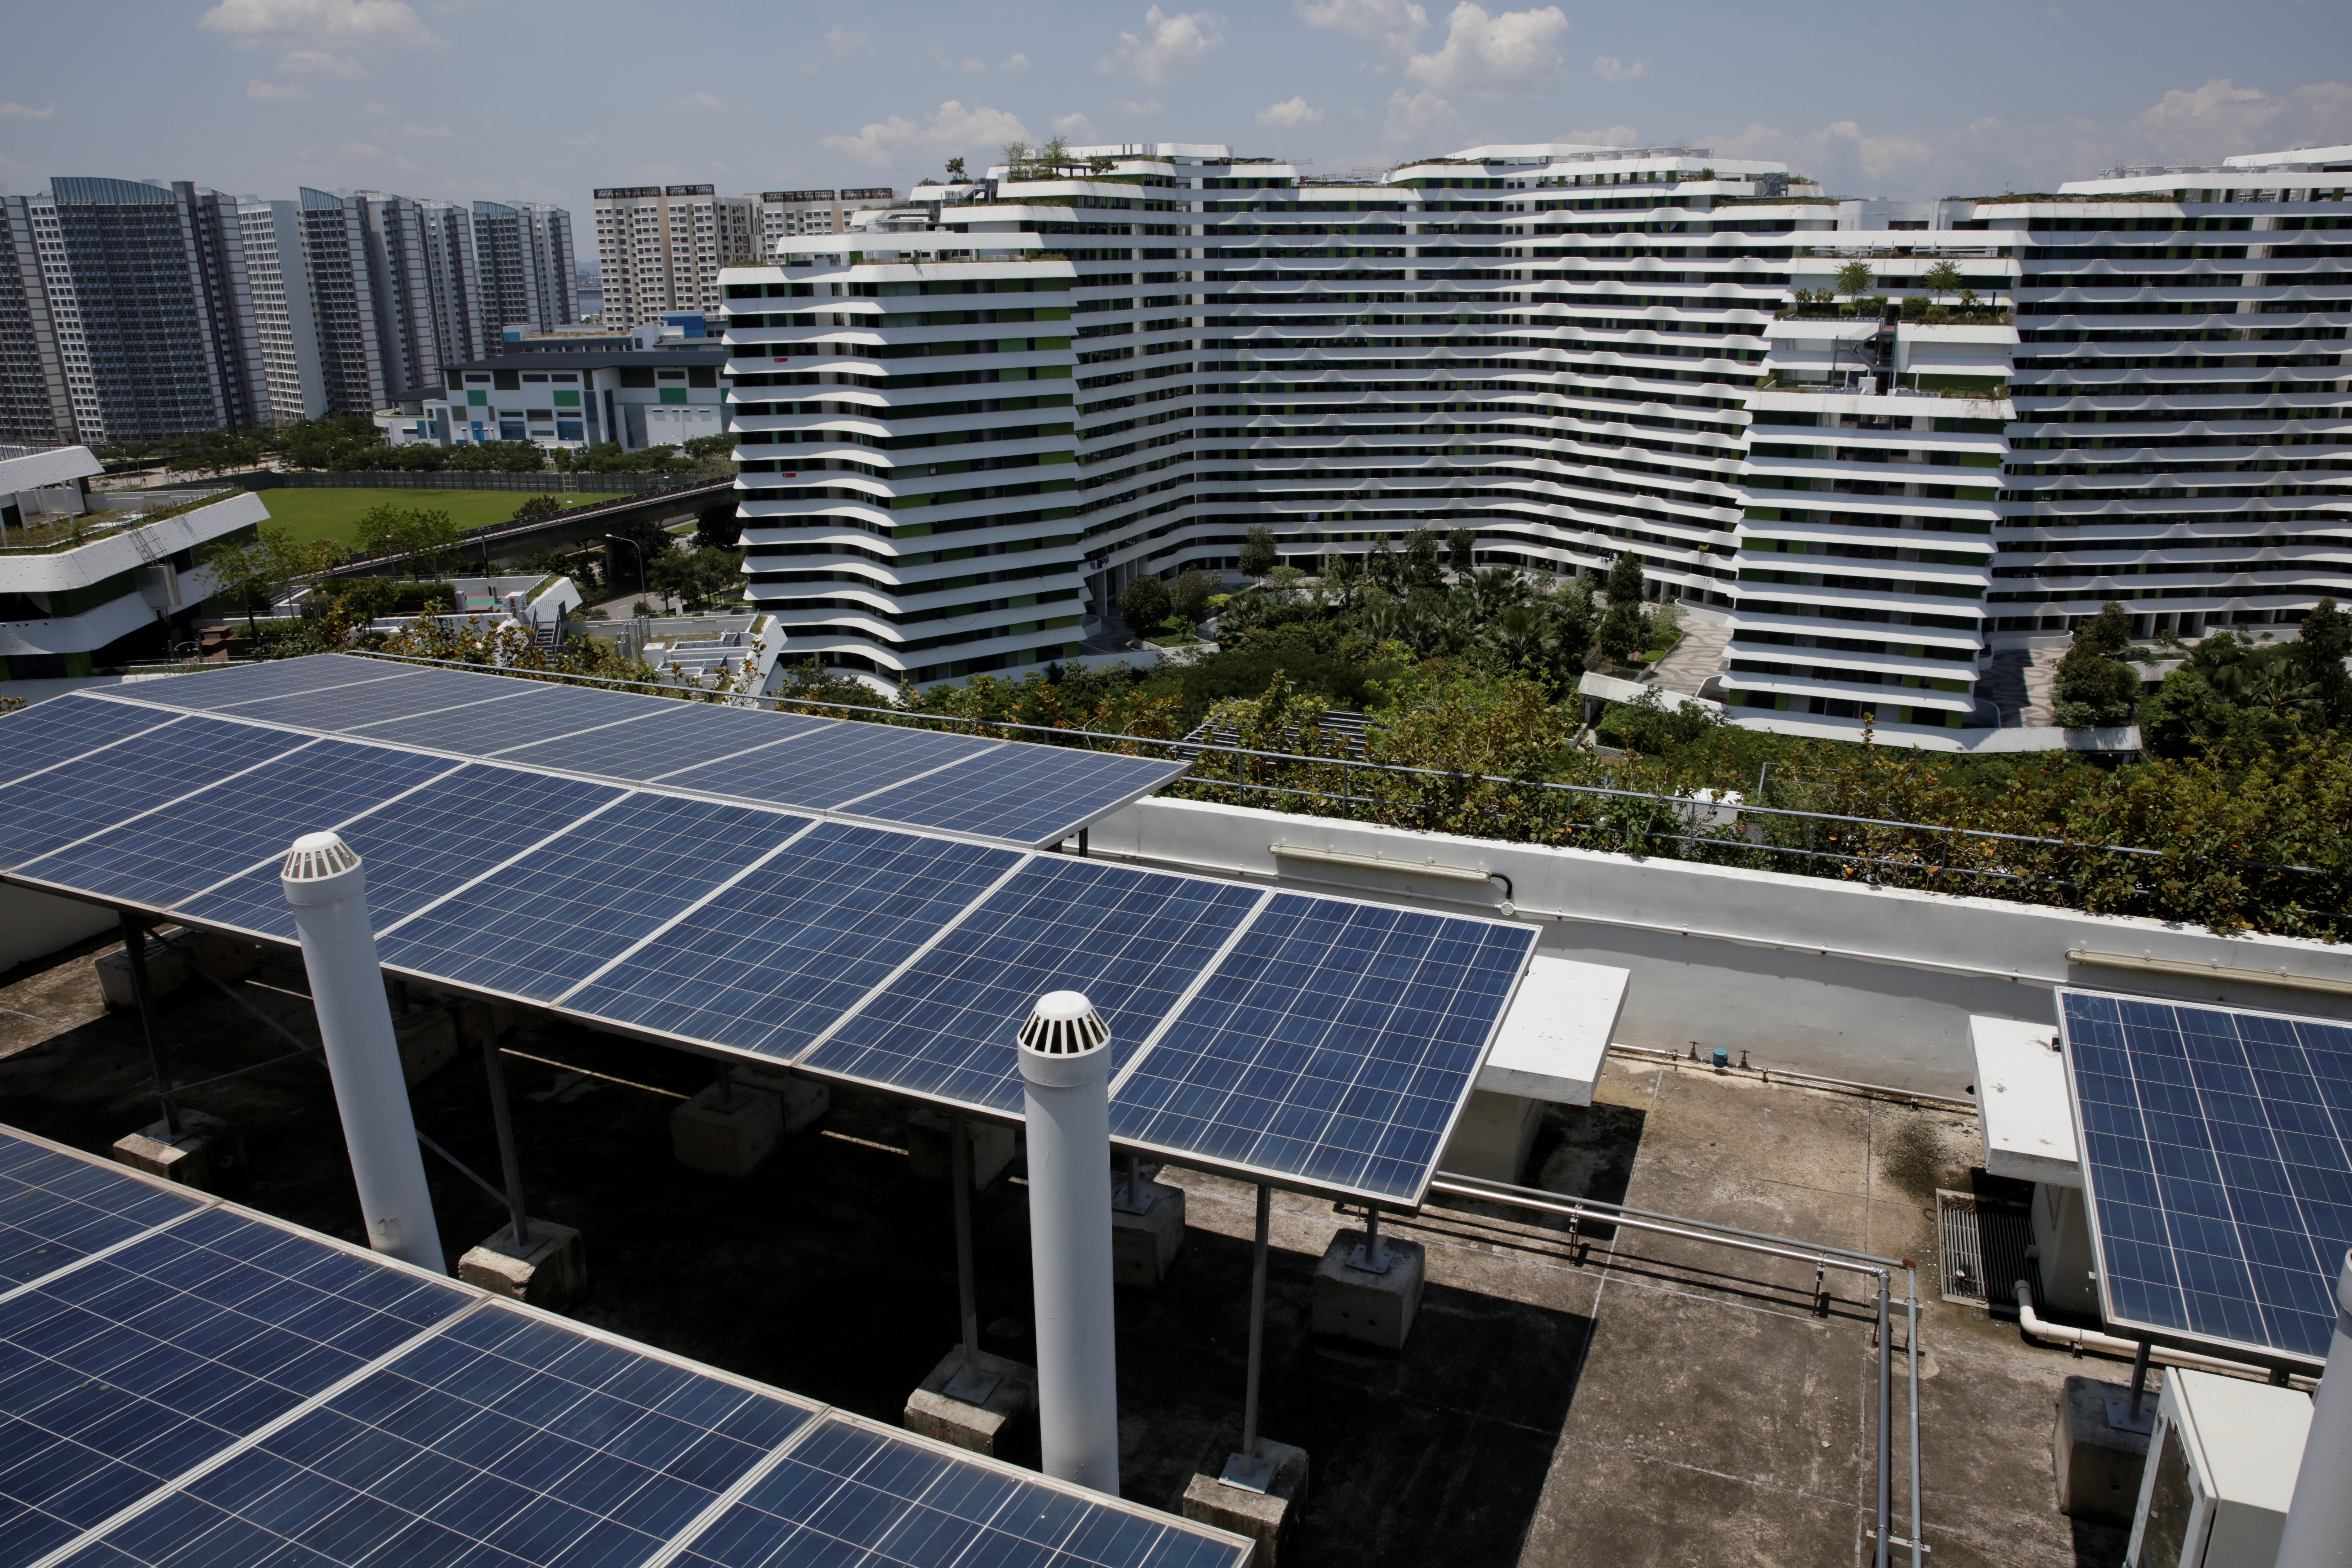 Solar panels are seen on the roof of a public housing block in Singapore